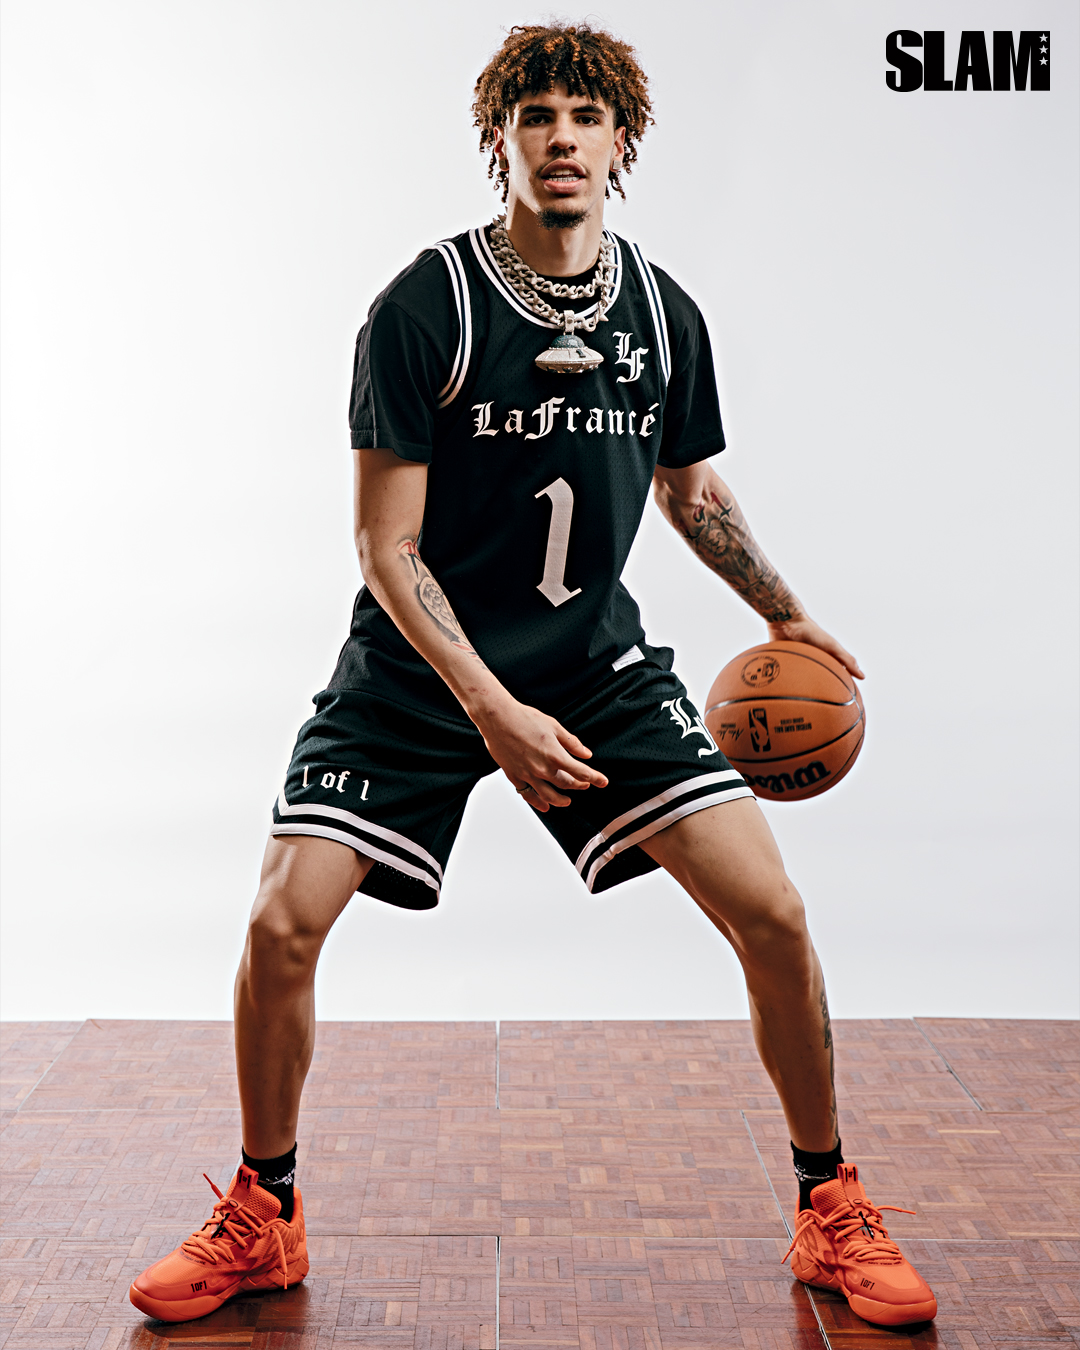 LaMelo Ball selected to 2022 Clorox Rising Stars – Queen City News